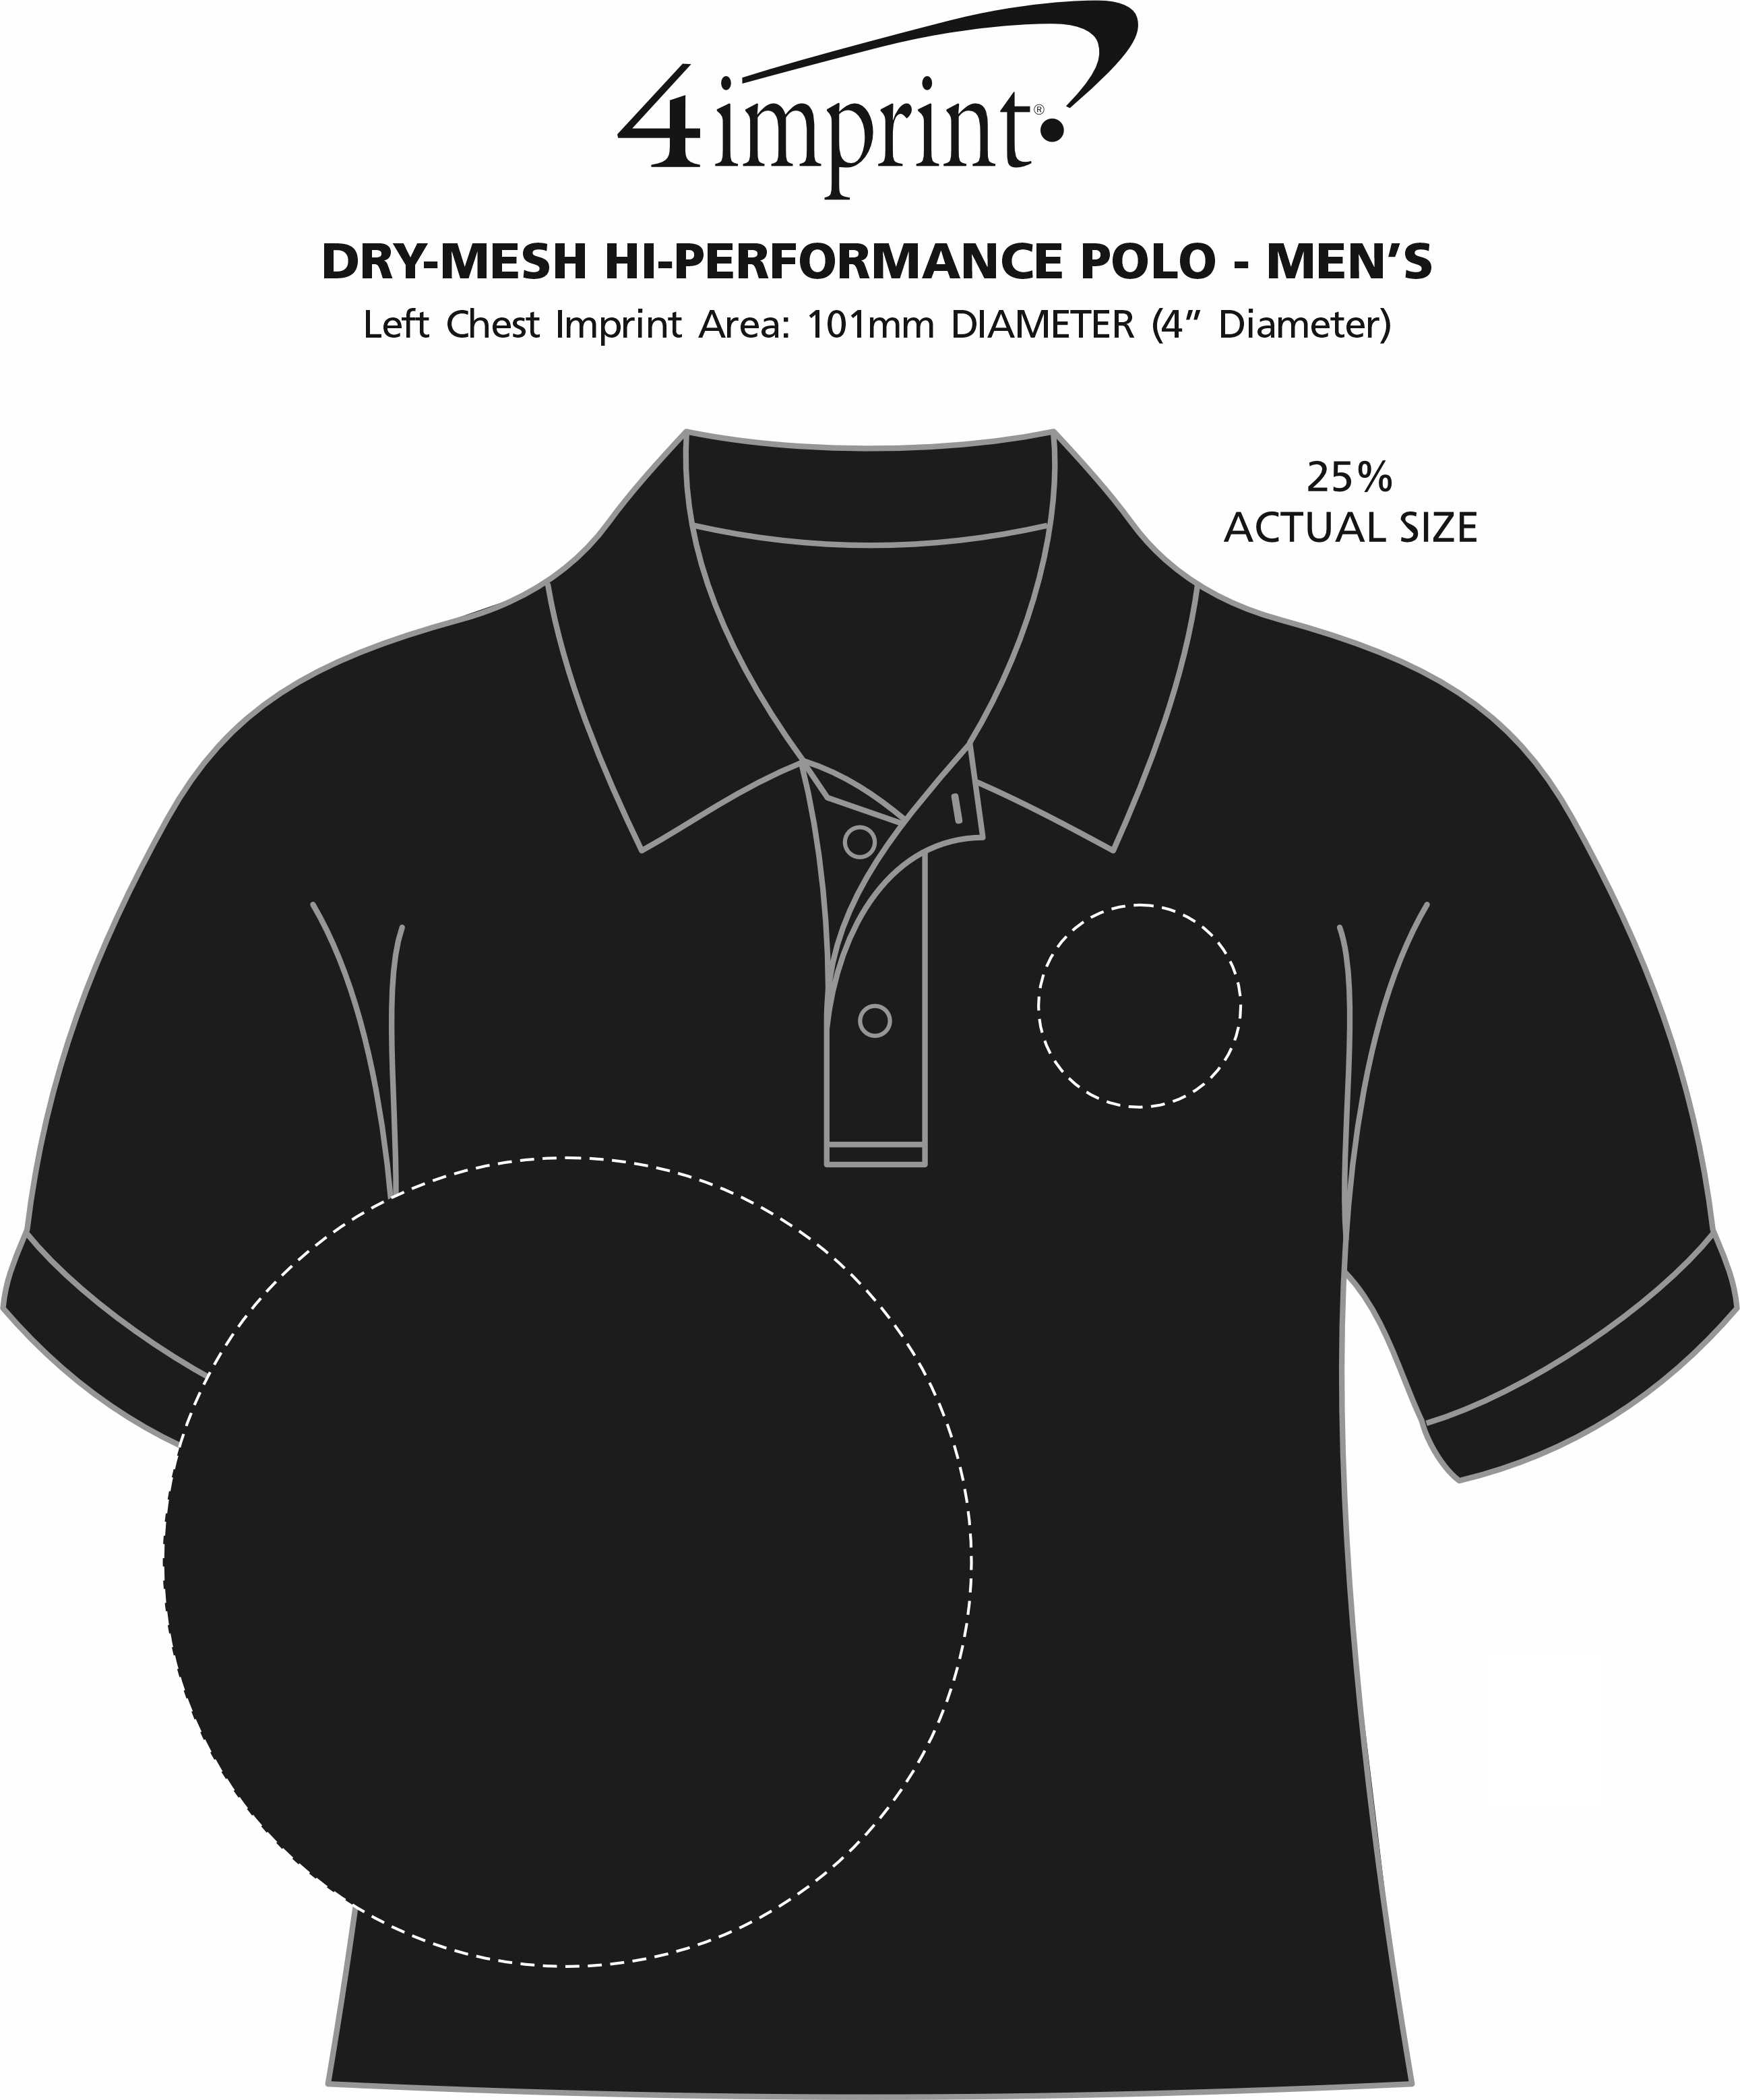 Imprint Area of Dry-Mesh Hi-Performance Polo - Men's - Embroidered